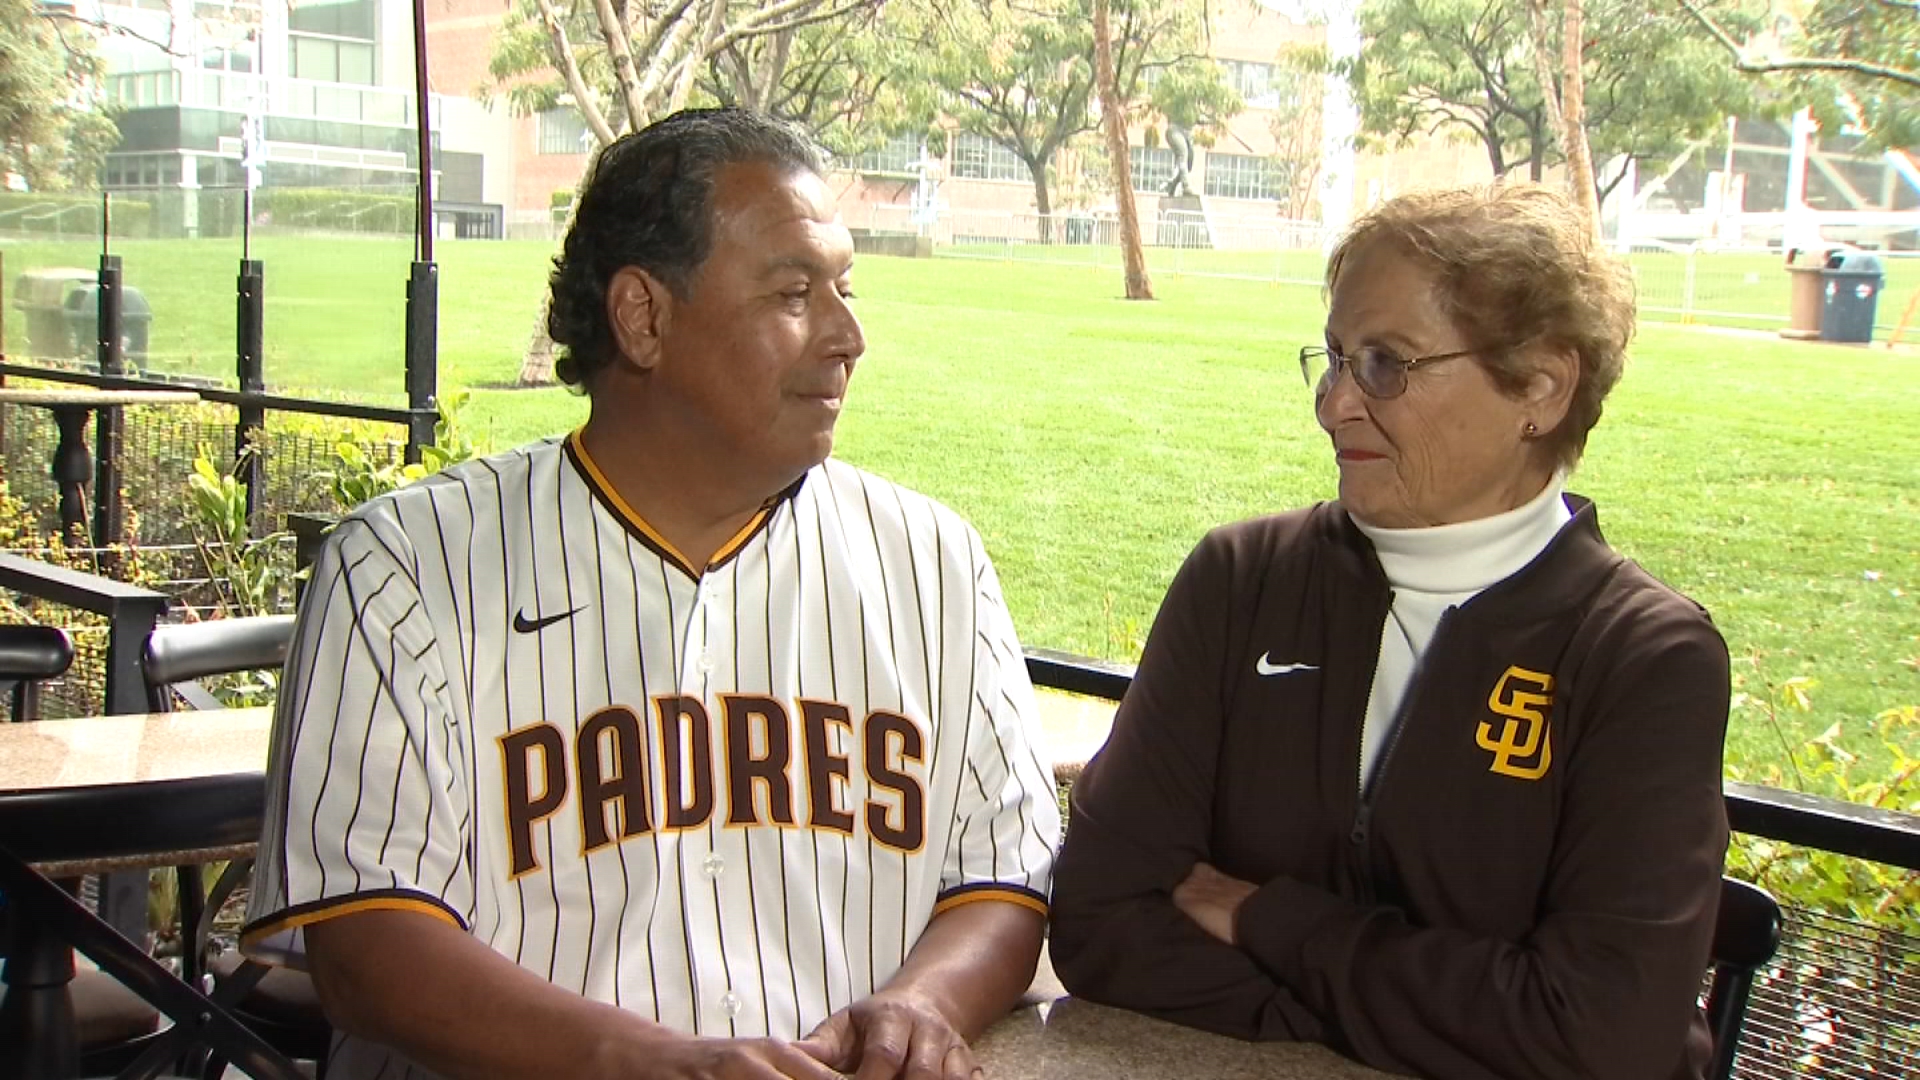 Ascending Padres Have Become Must-See TV In San Diego